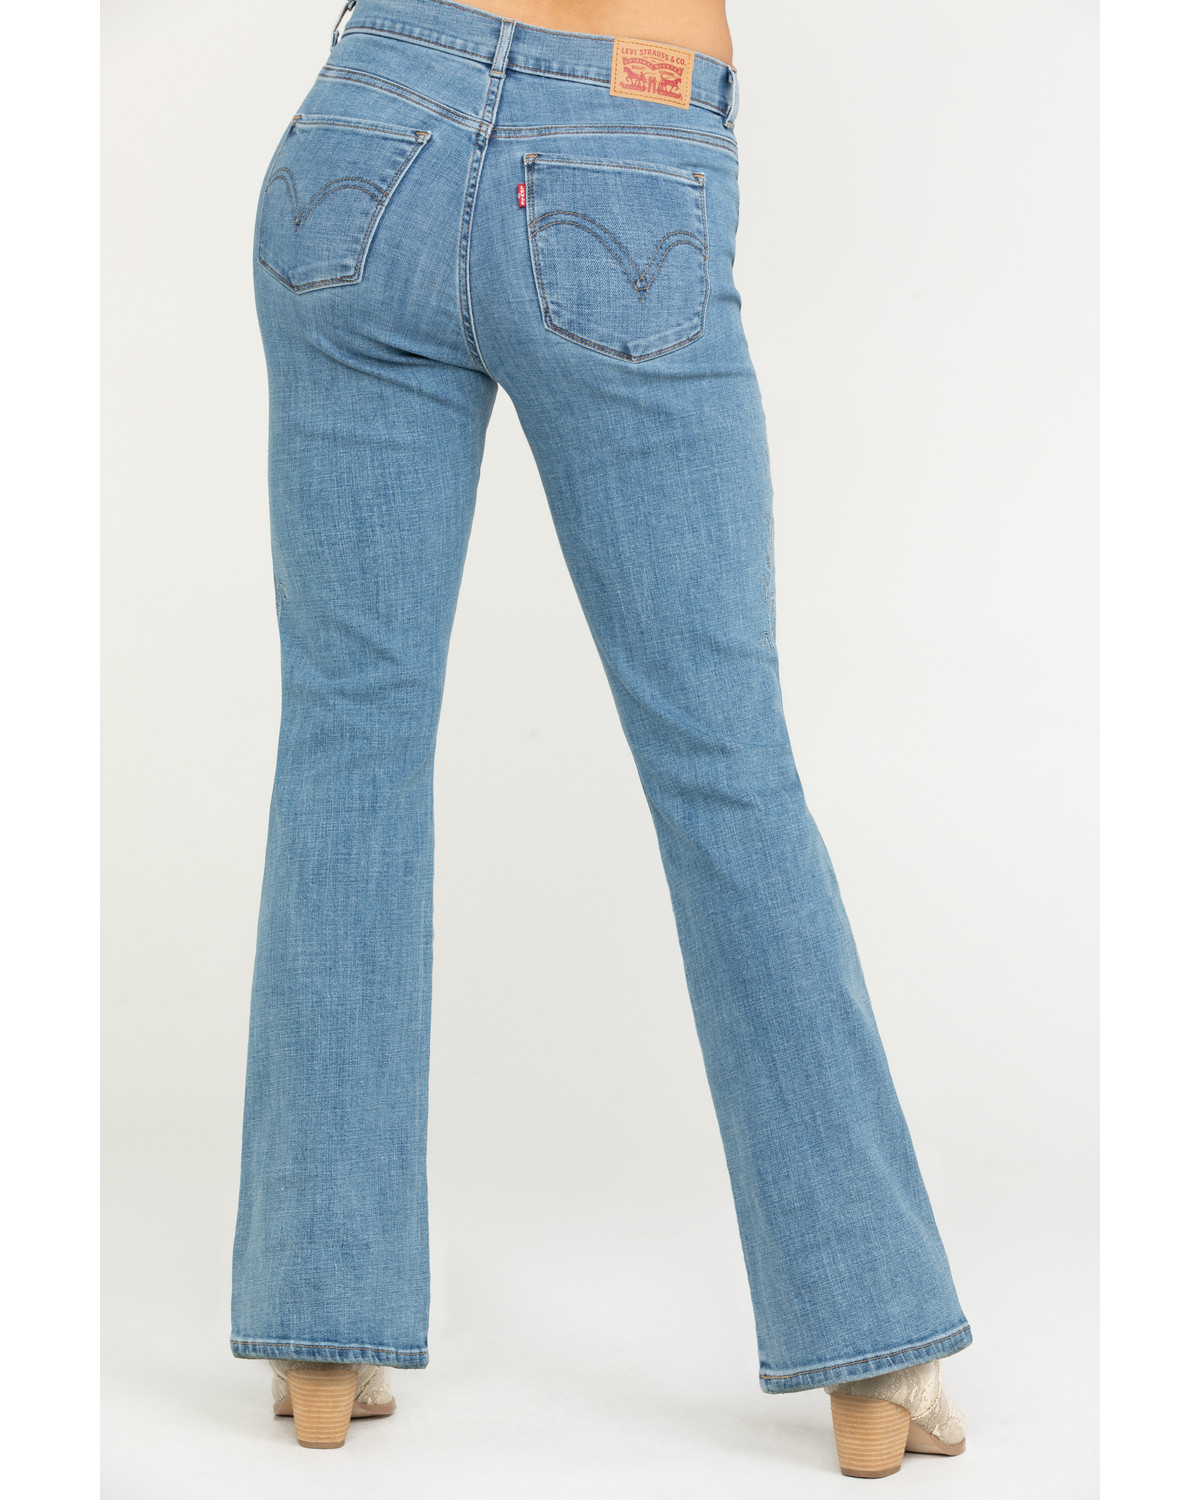 levi pull on jeans bootcut Cheaper Than 